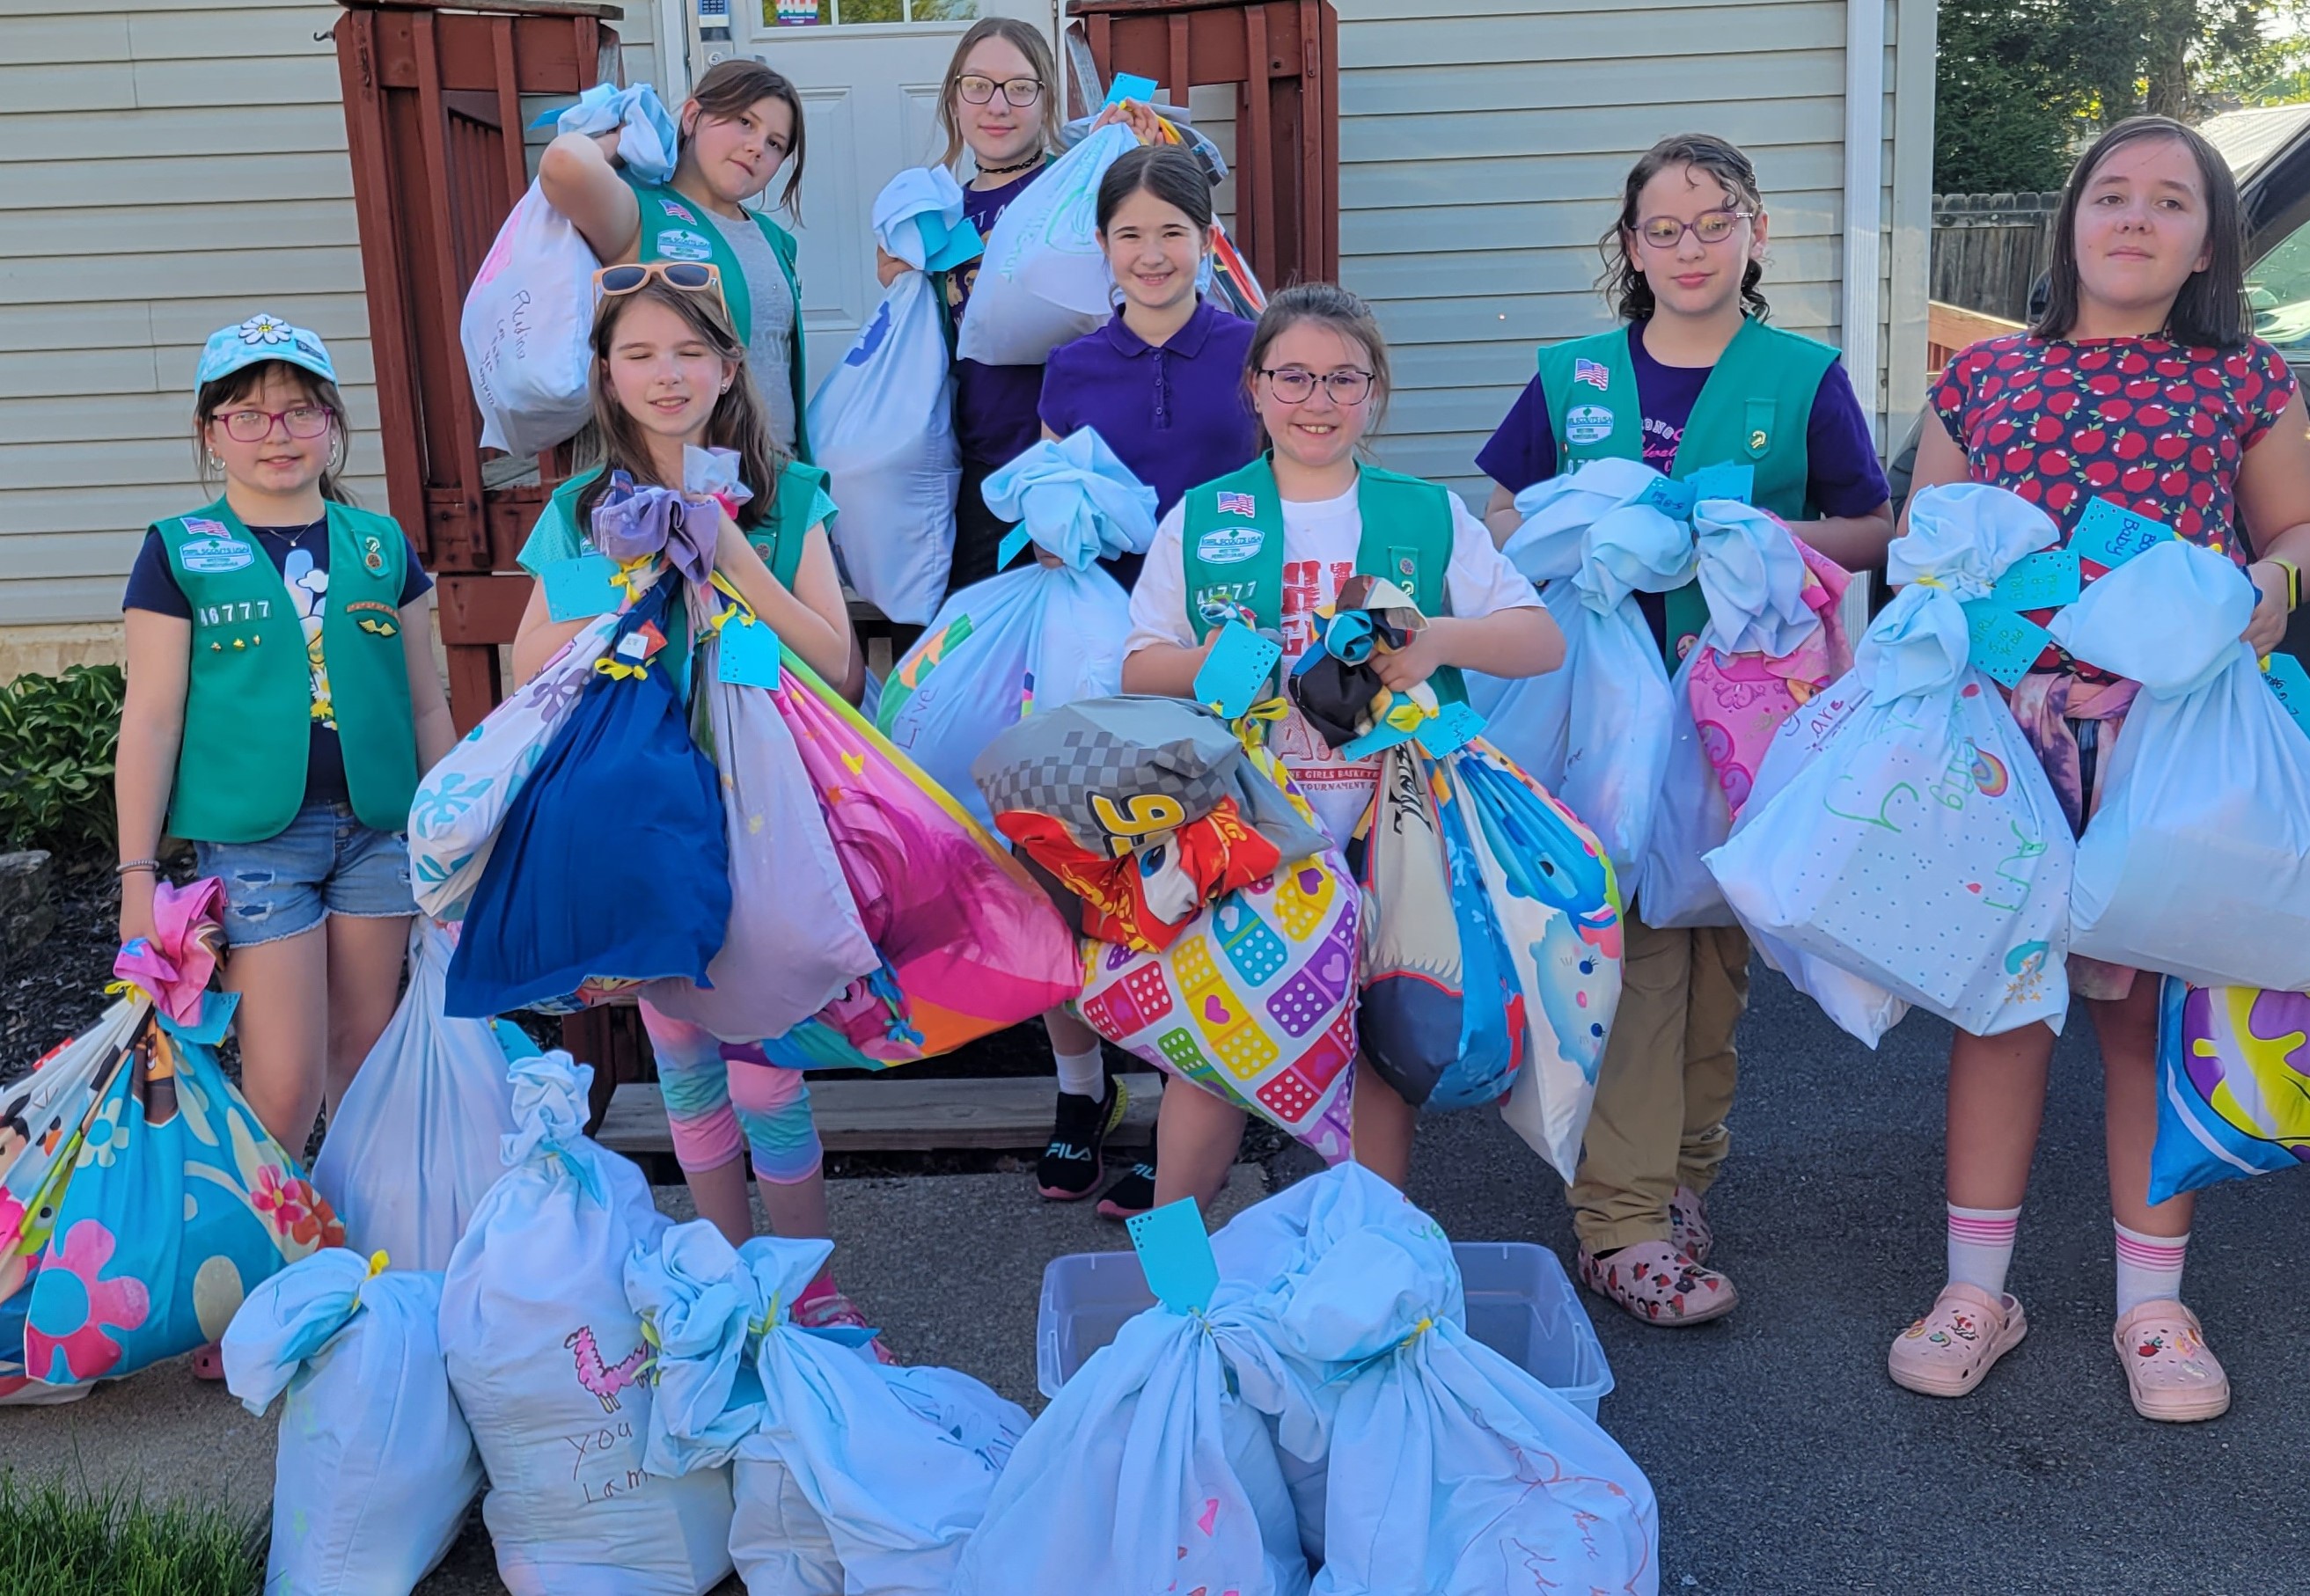 Junior Girl Scouts from Troop # 46777 created 30 care packages for children impacted by domestic violence while earning their Bronze Award, the third highest award in Girl Scouts of the USA.  Delivering the care packages are:  Lydia Geist, Serena Elbel, Jaysa Barenchik, Bailey Schneider, Isabella Valkosky, Danielle Davis, Abigail Richards, and Anna Bishop.  Missing from the photo is Bailey Griffith.